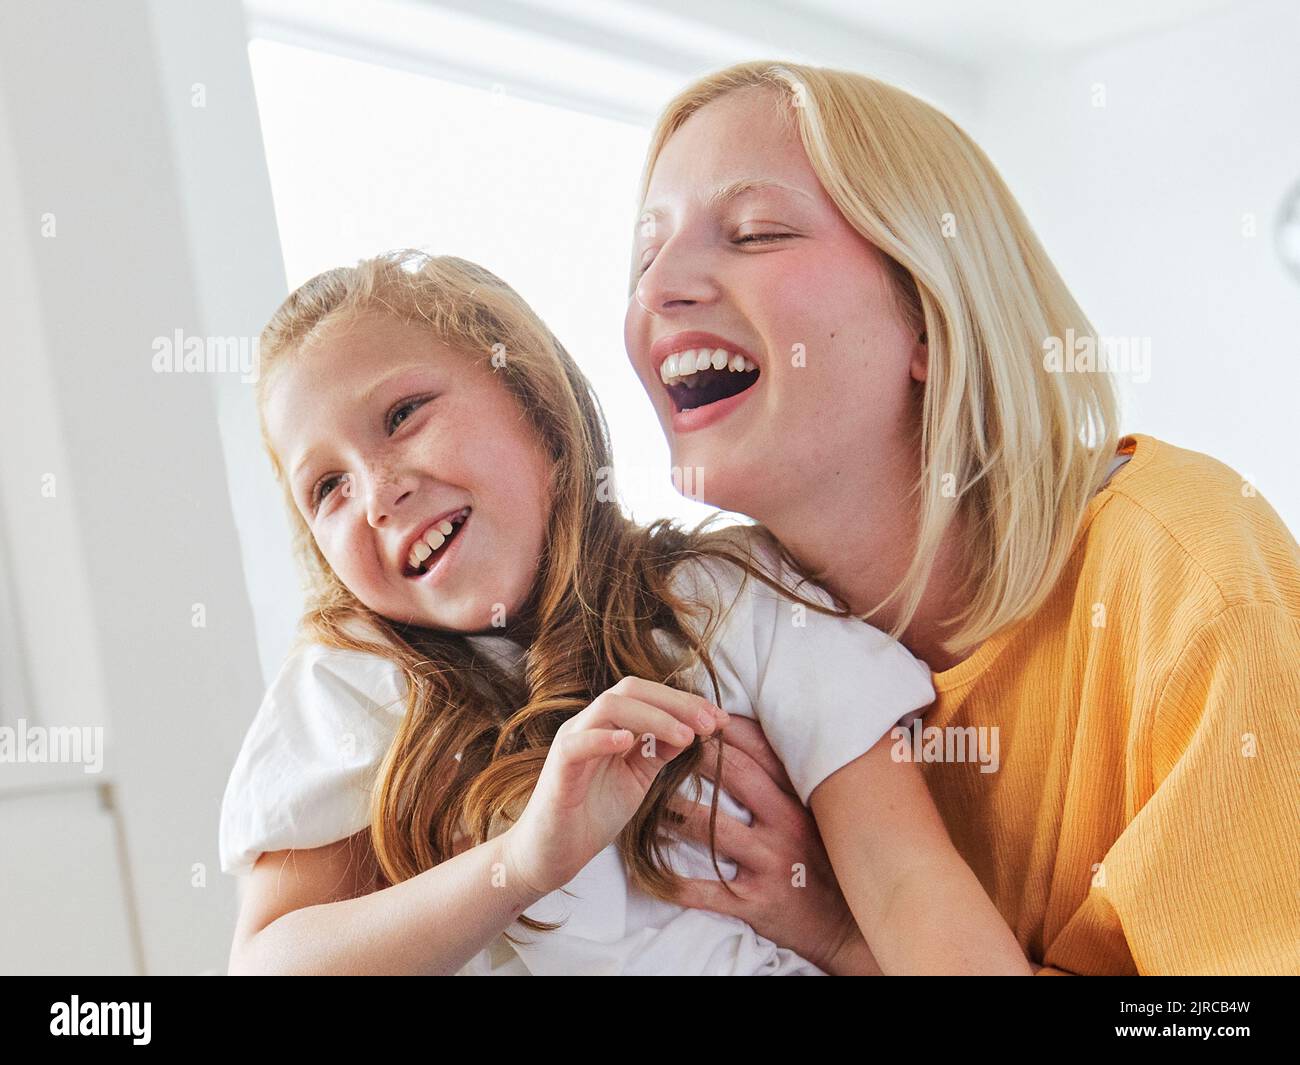 child sister fun family girl together childhood female happy daughter young lifestyle home indoor happiness kid togetherness mother woman Stock Photo